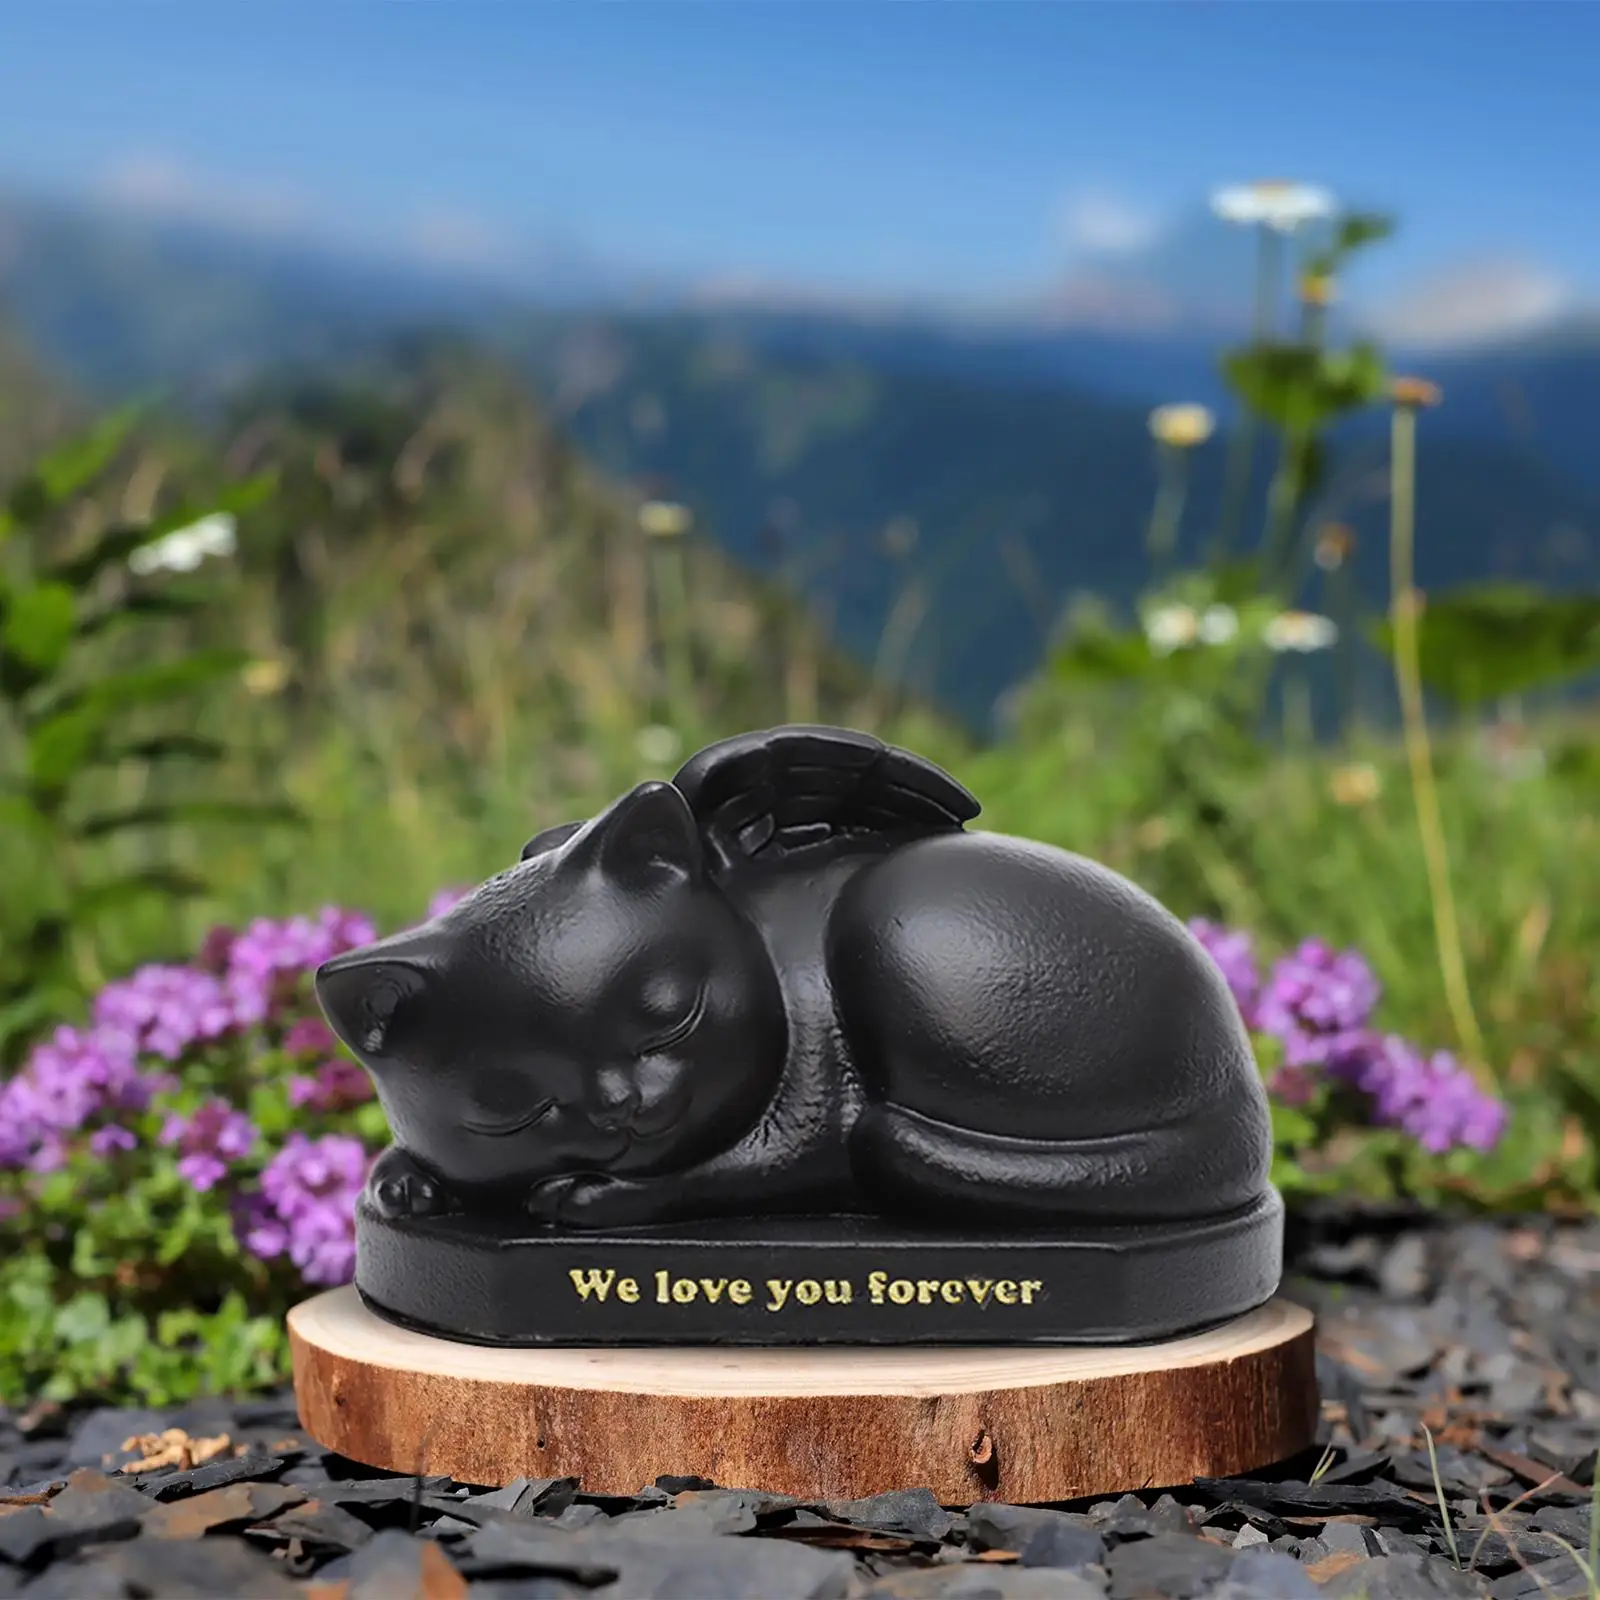 Cremation Urn Final Comforting Resting Place Pet Supplies Sympathy Pet Urns